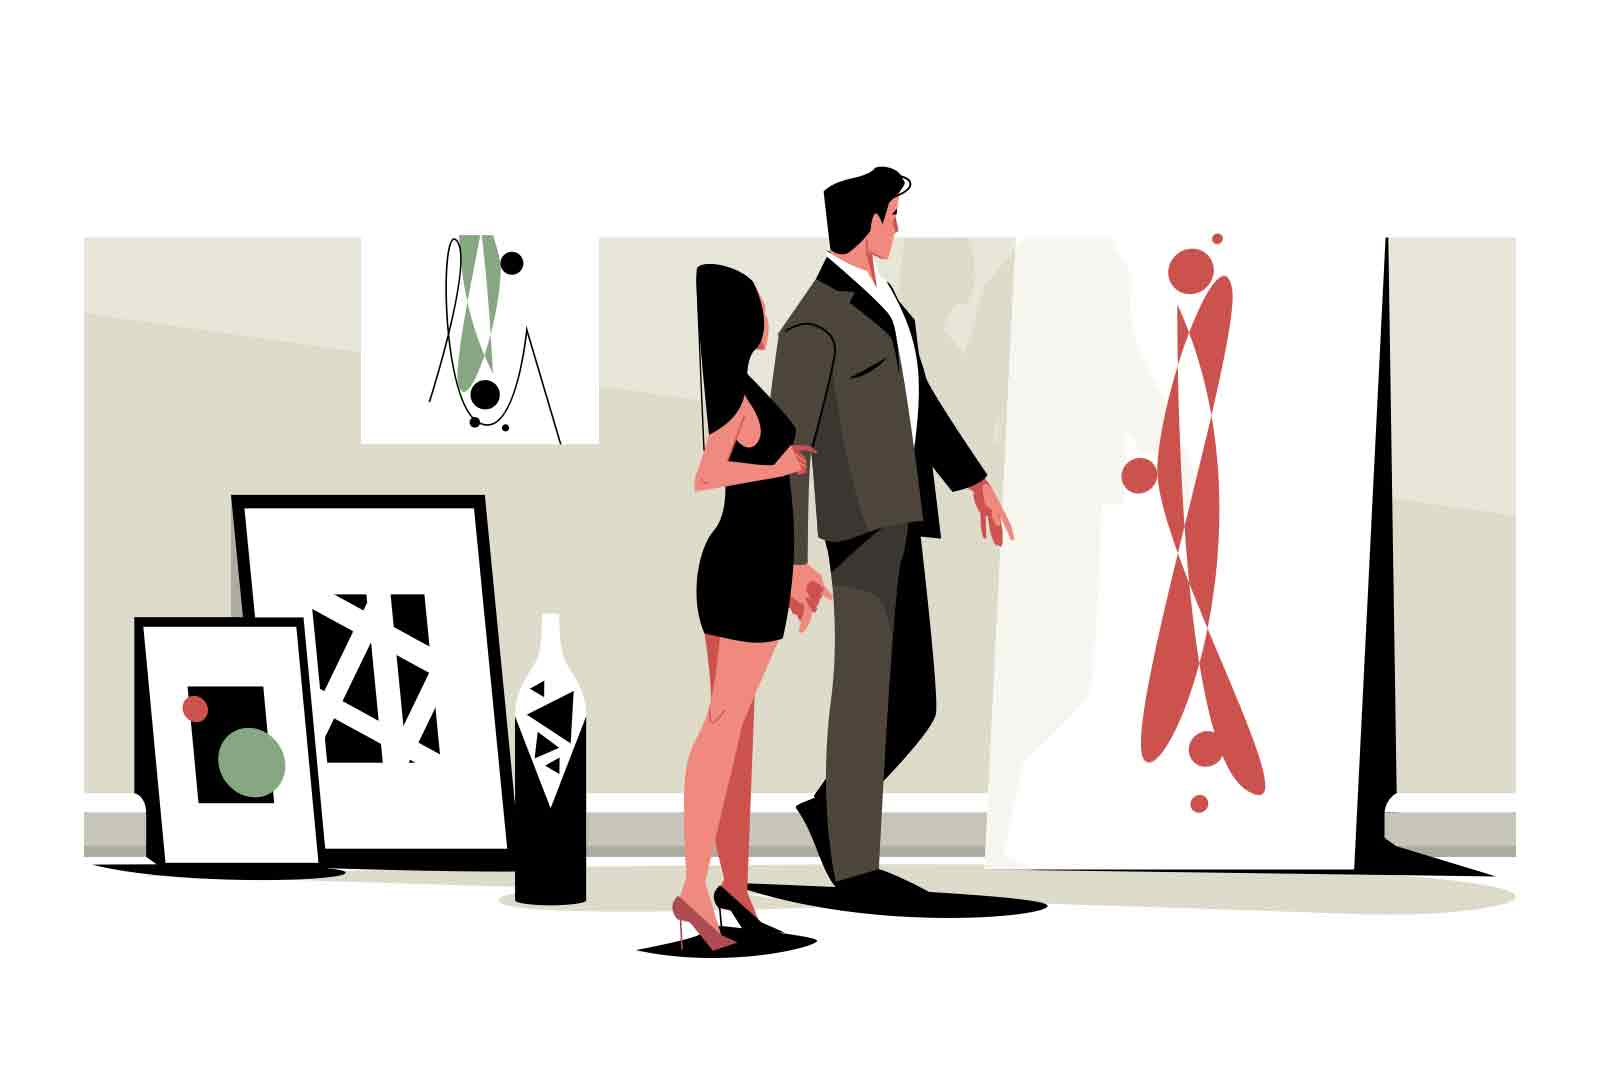 Couple visit art gallery of modern art together vector illustration. Man and woman at art gallery flat style. Artwork and cultural evening idea